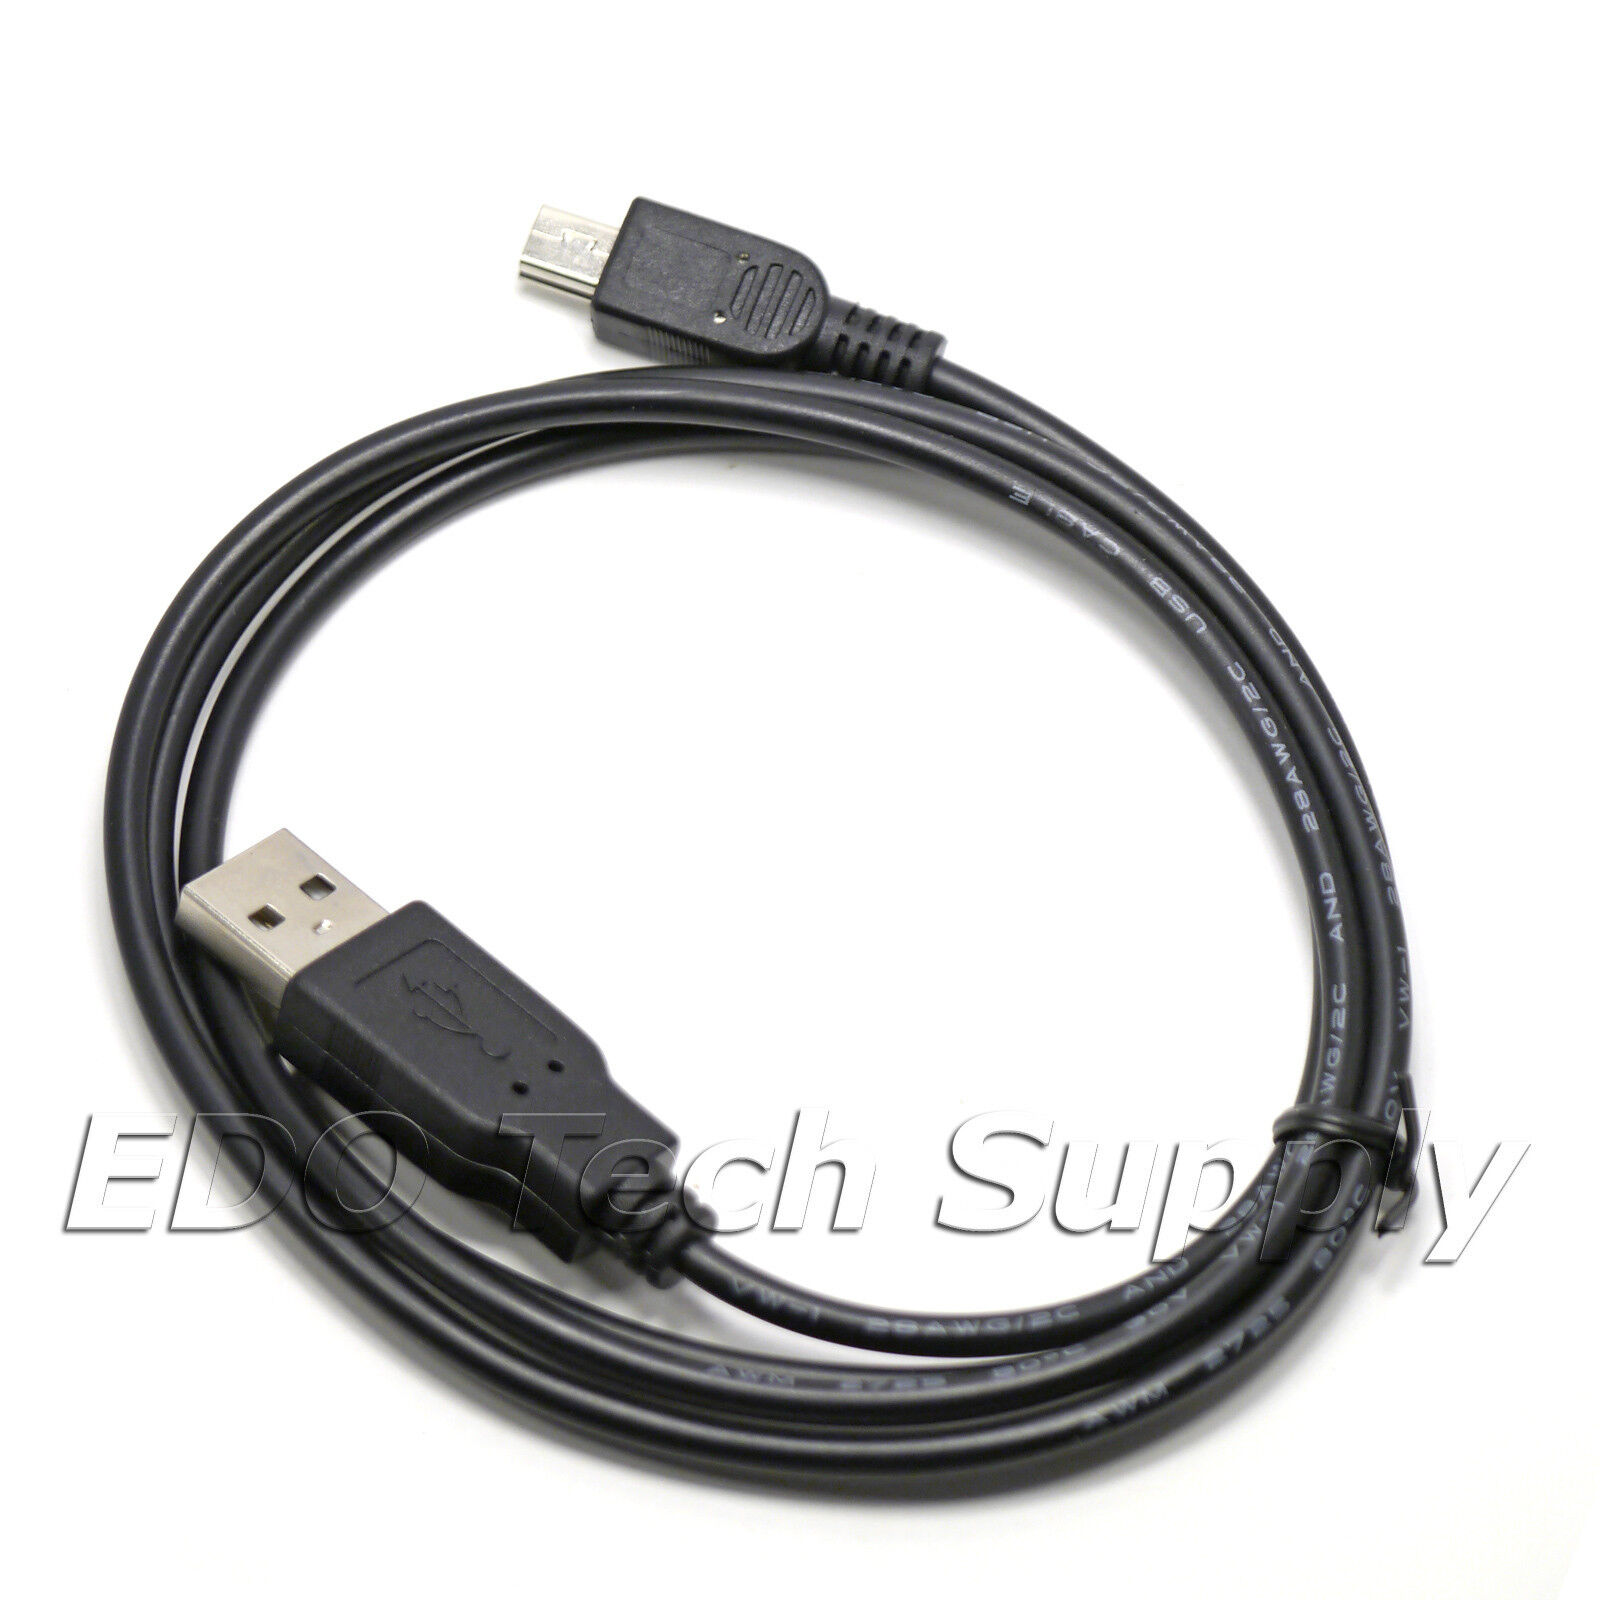 Mini USB map update data sync cable for GARMIN nuvi 250 40 40LM 65lm 50lm GPS